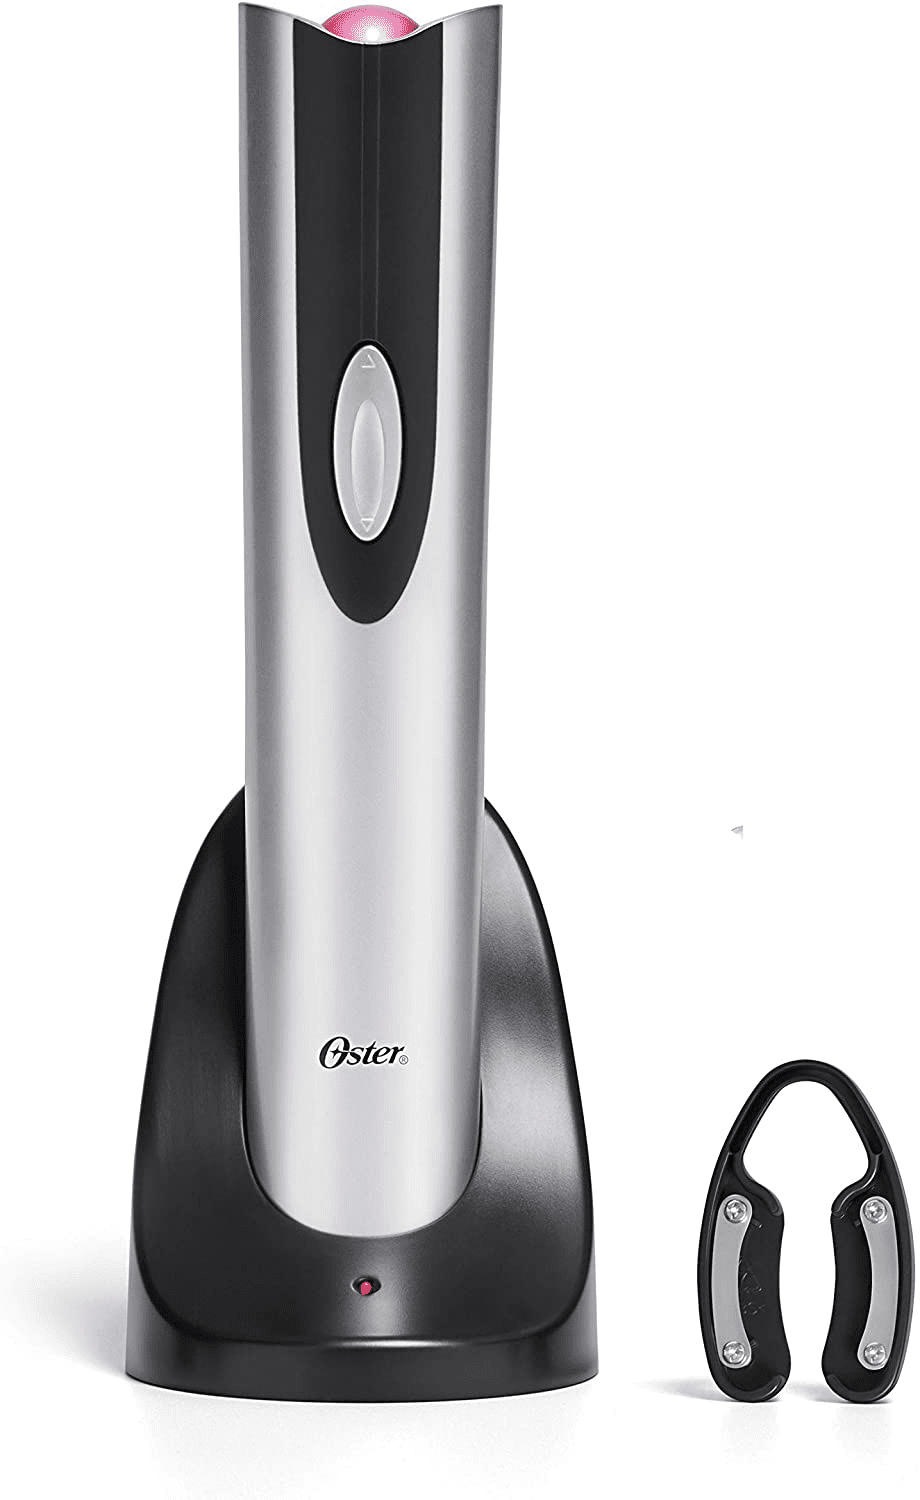 Electric Wine Bottle Opener, , One-Touch, Open 60-80 Bottles, with Foil  Cutter